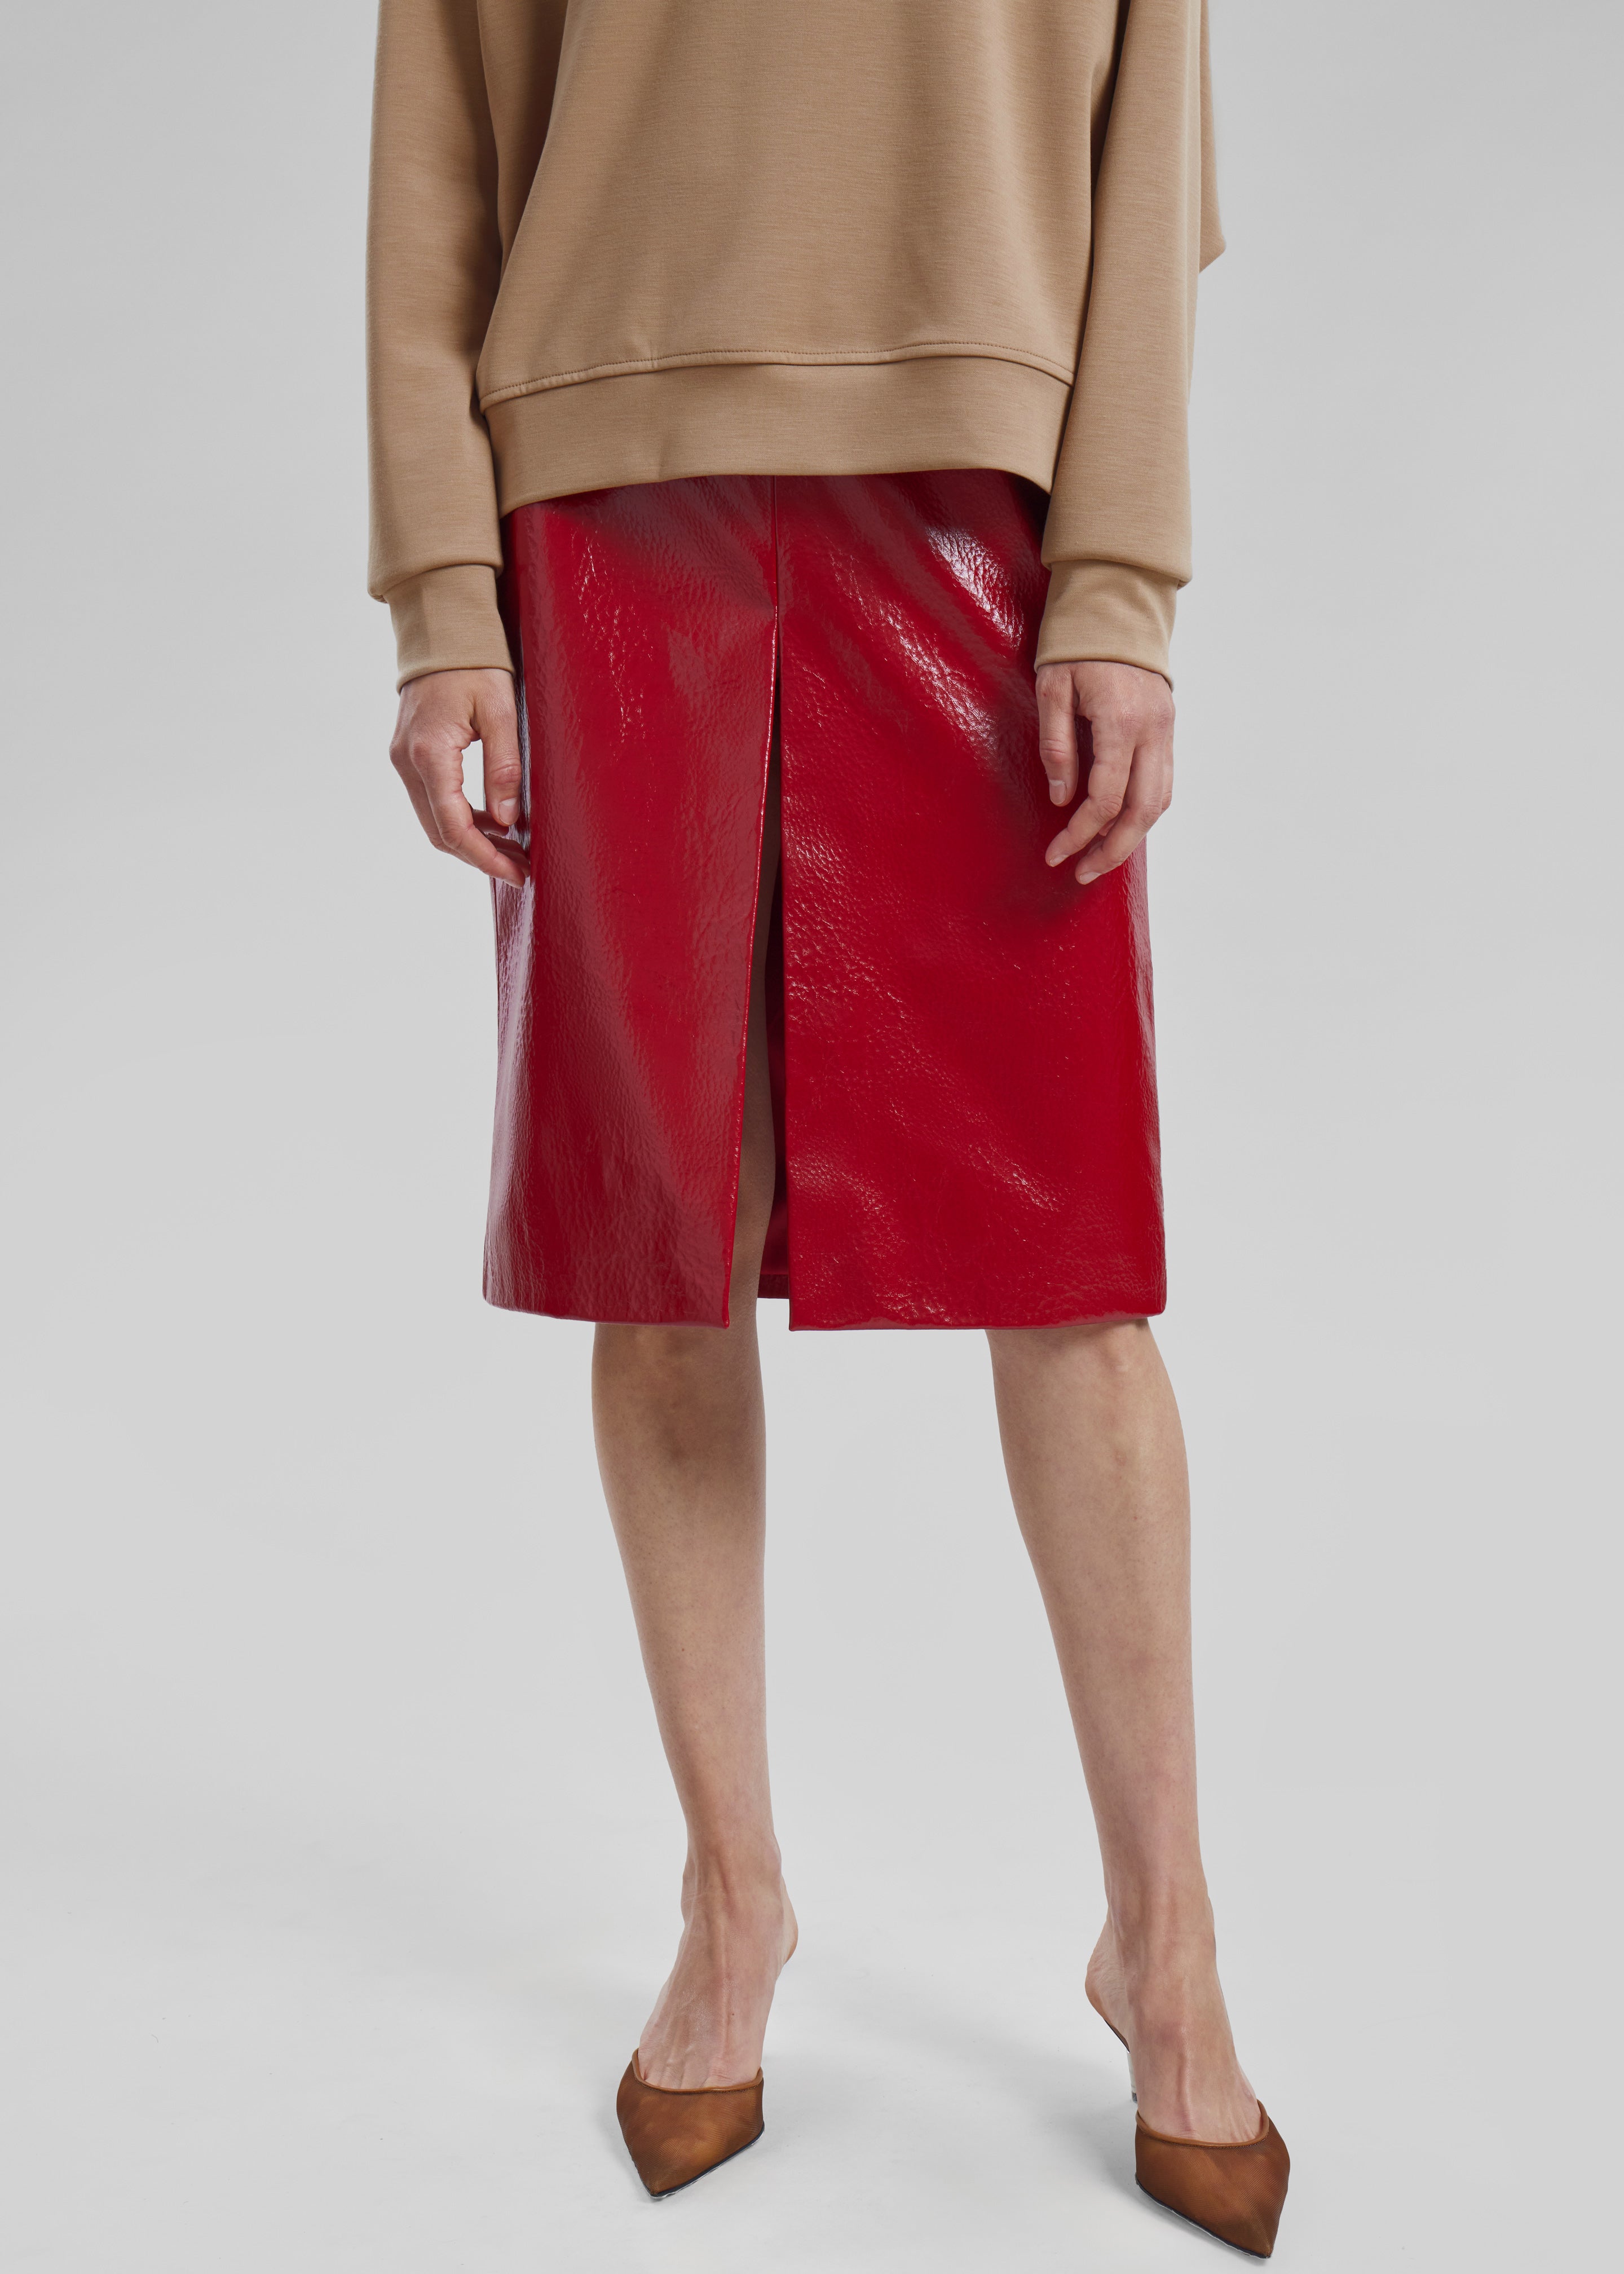 Britt Crackled Faux Leather Midi Skirt - Red - 2